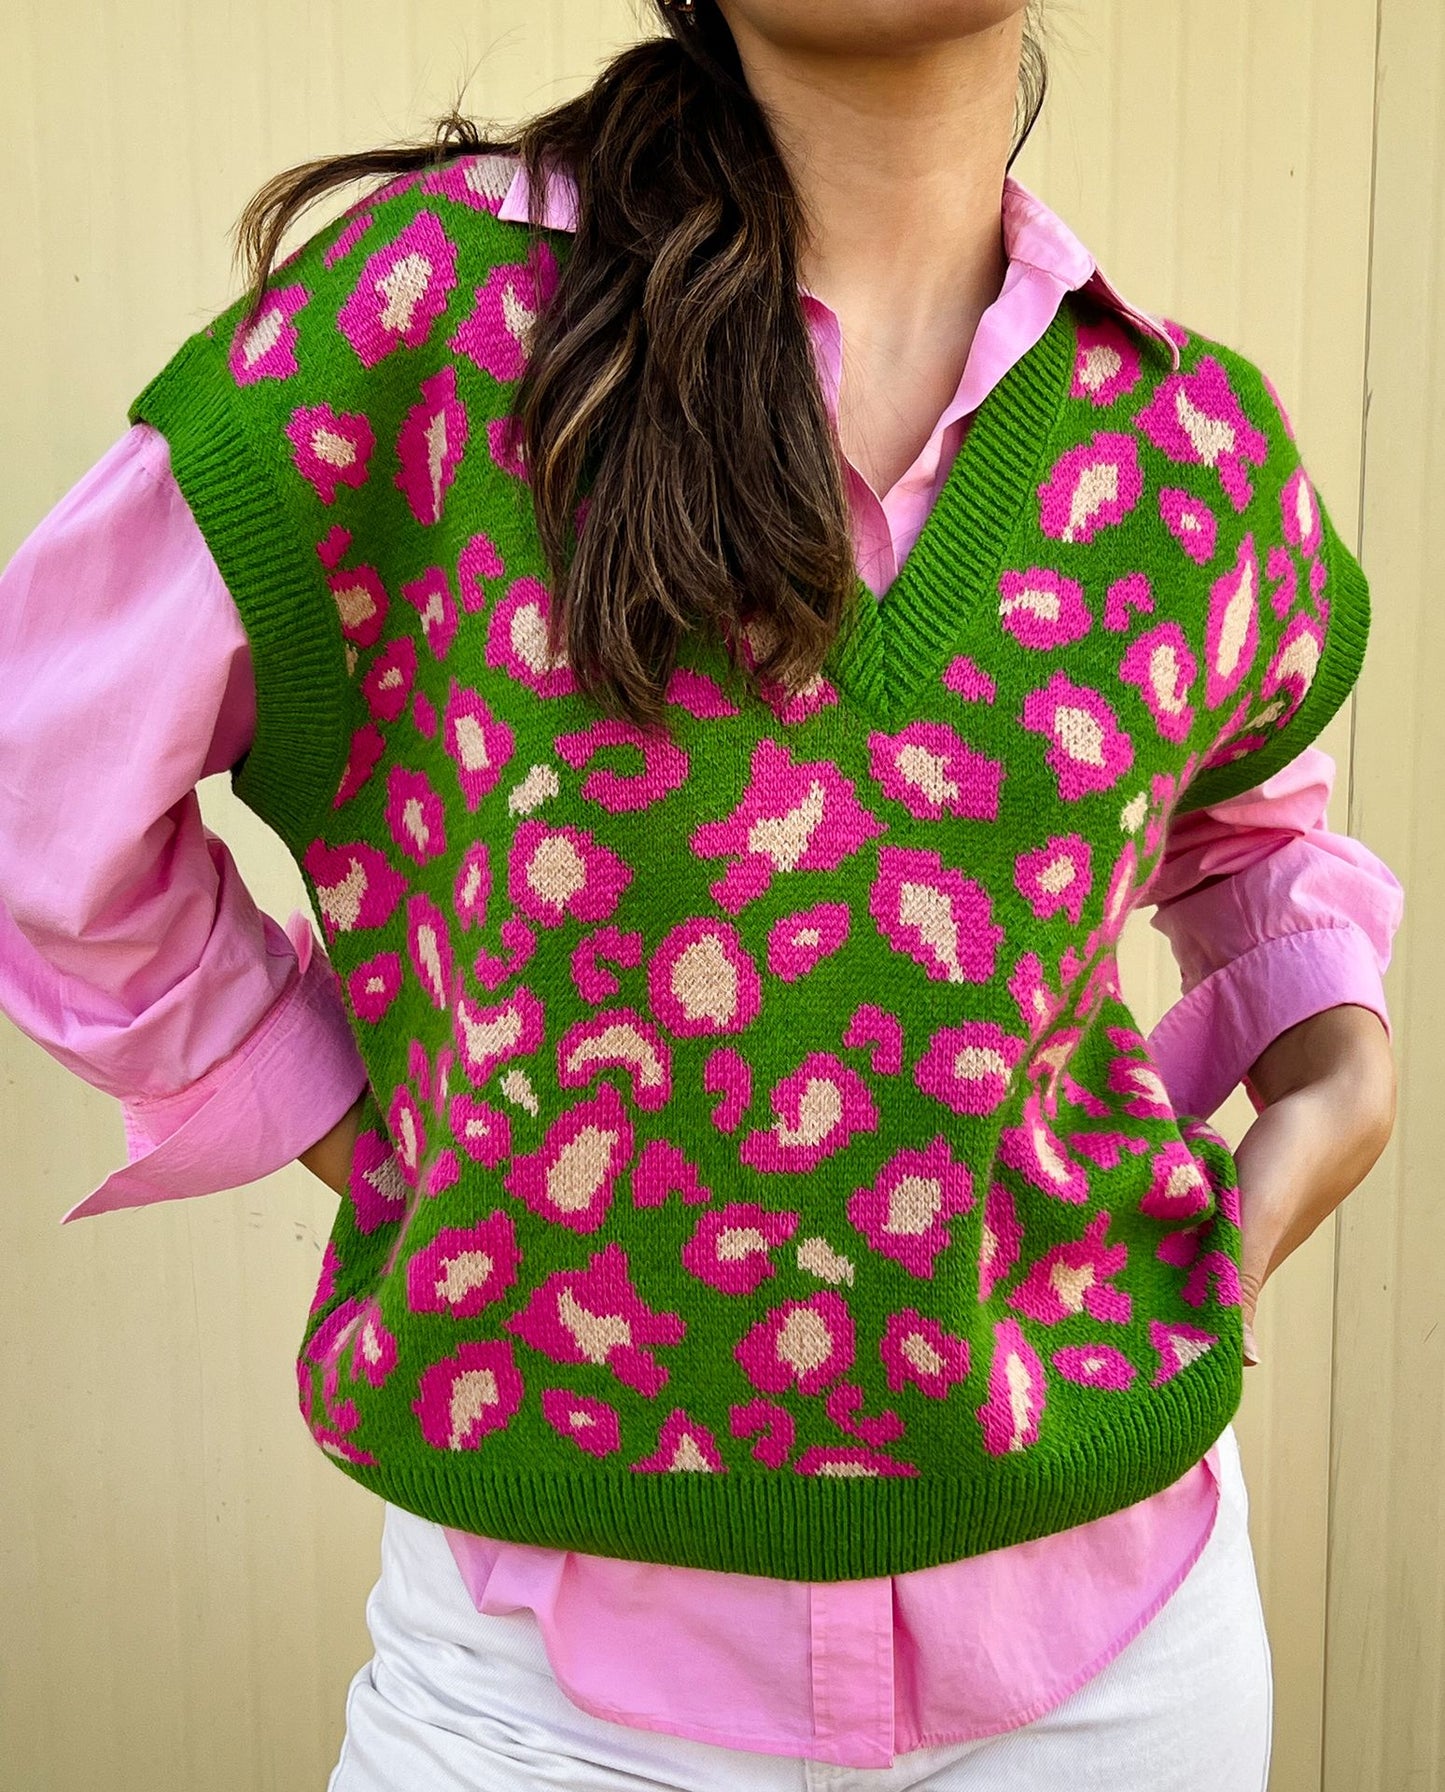 Cheetah Knitted Vest Green X Pink